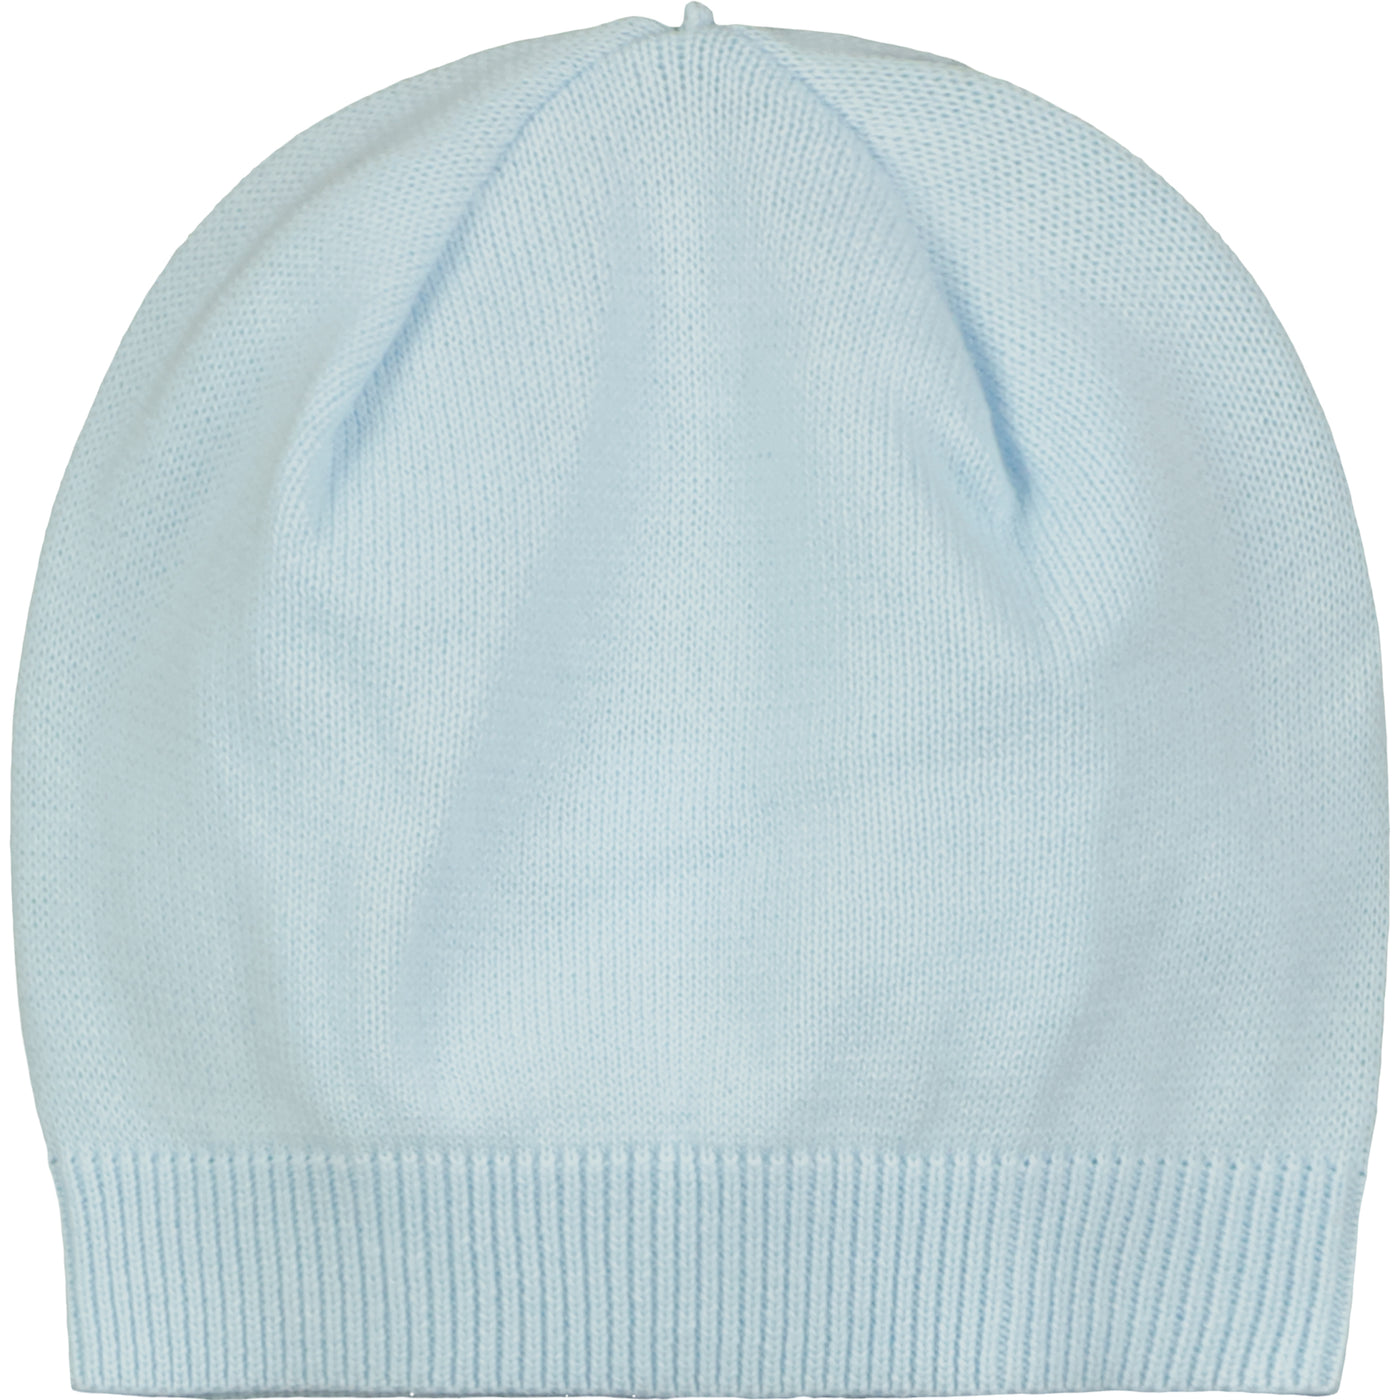 Easton Blue Knit Boys All-in-One